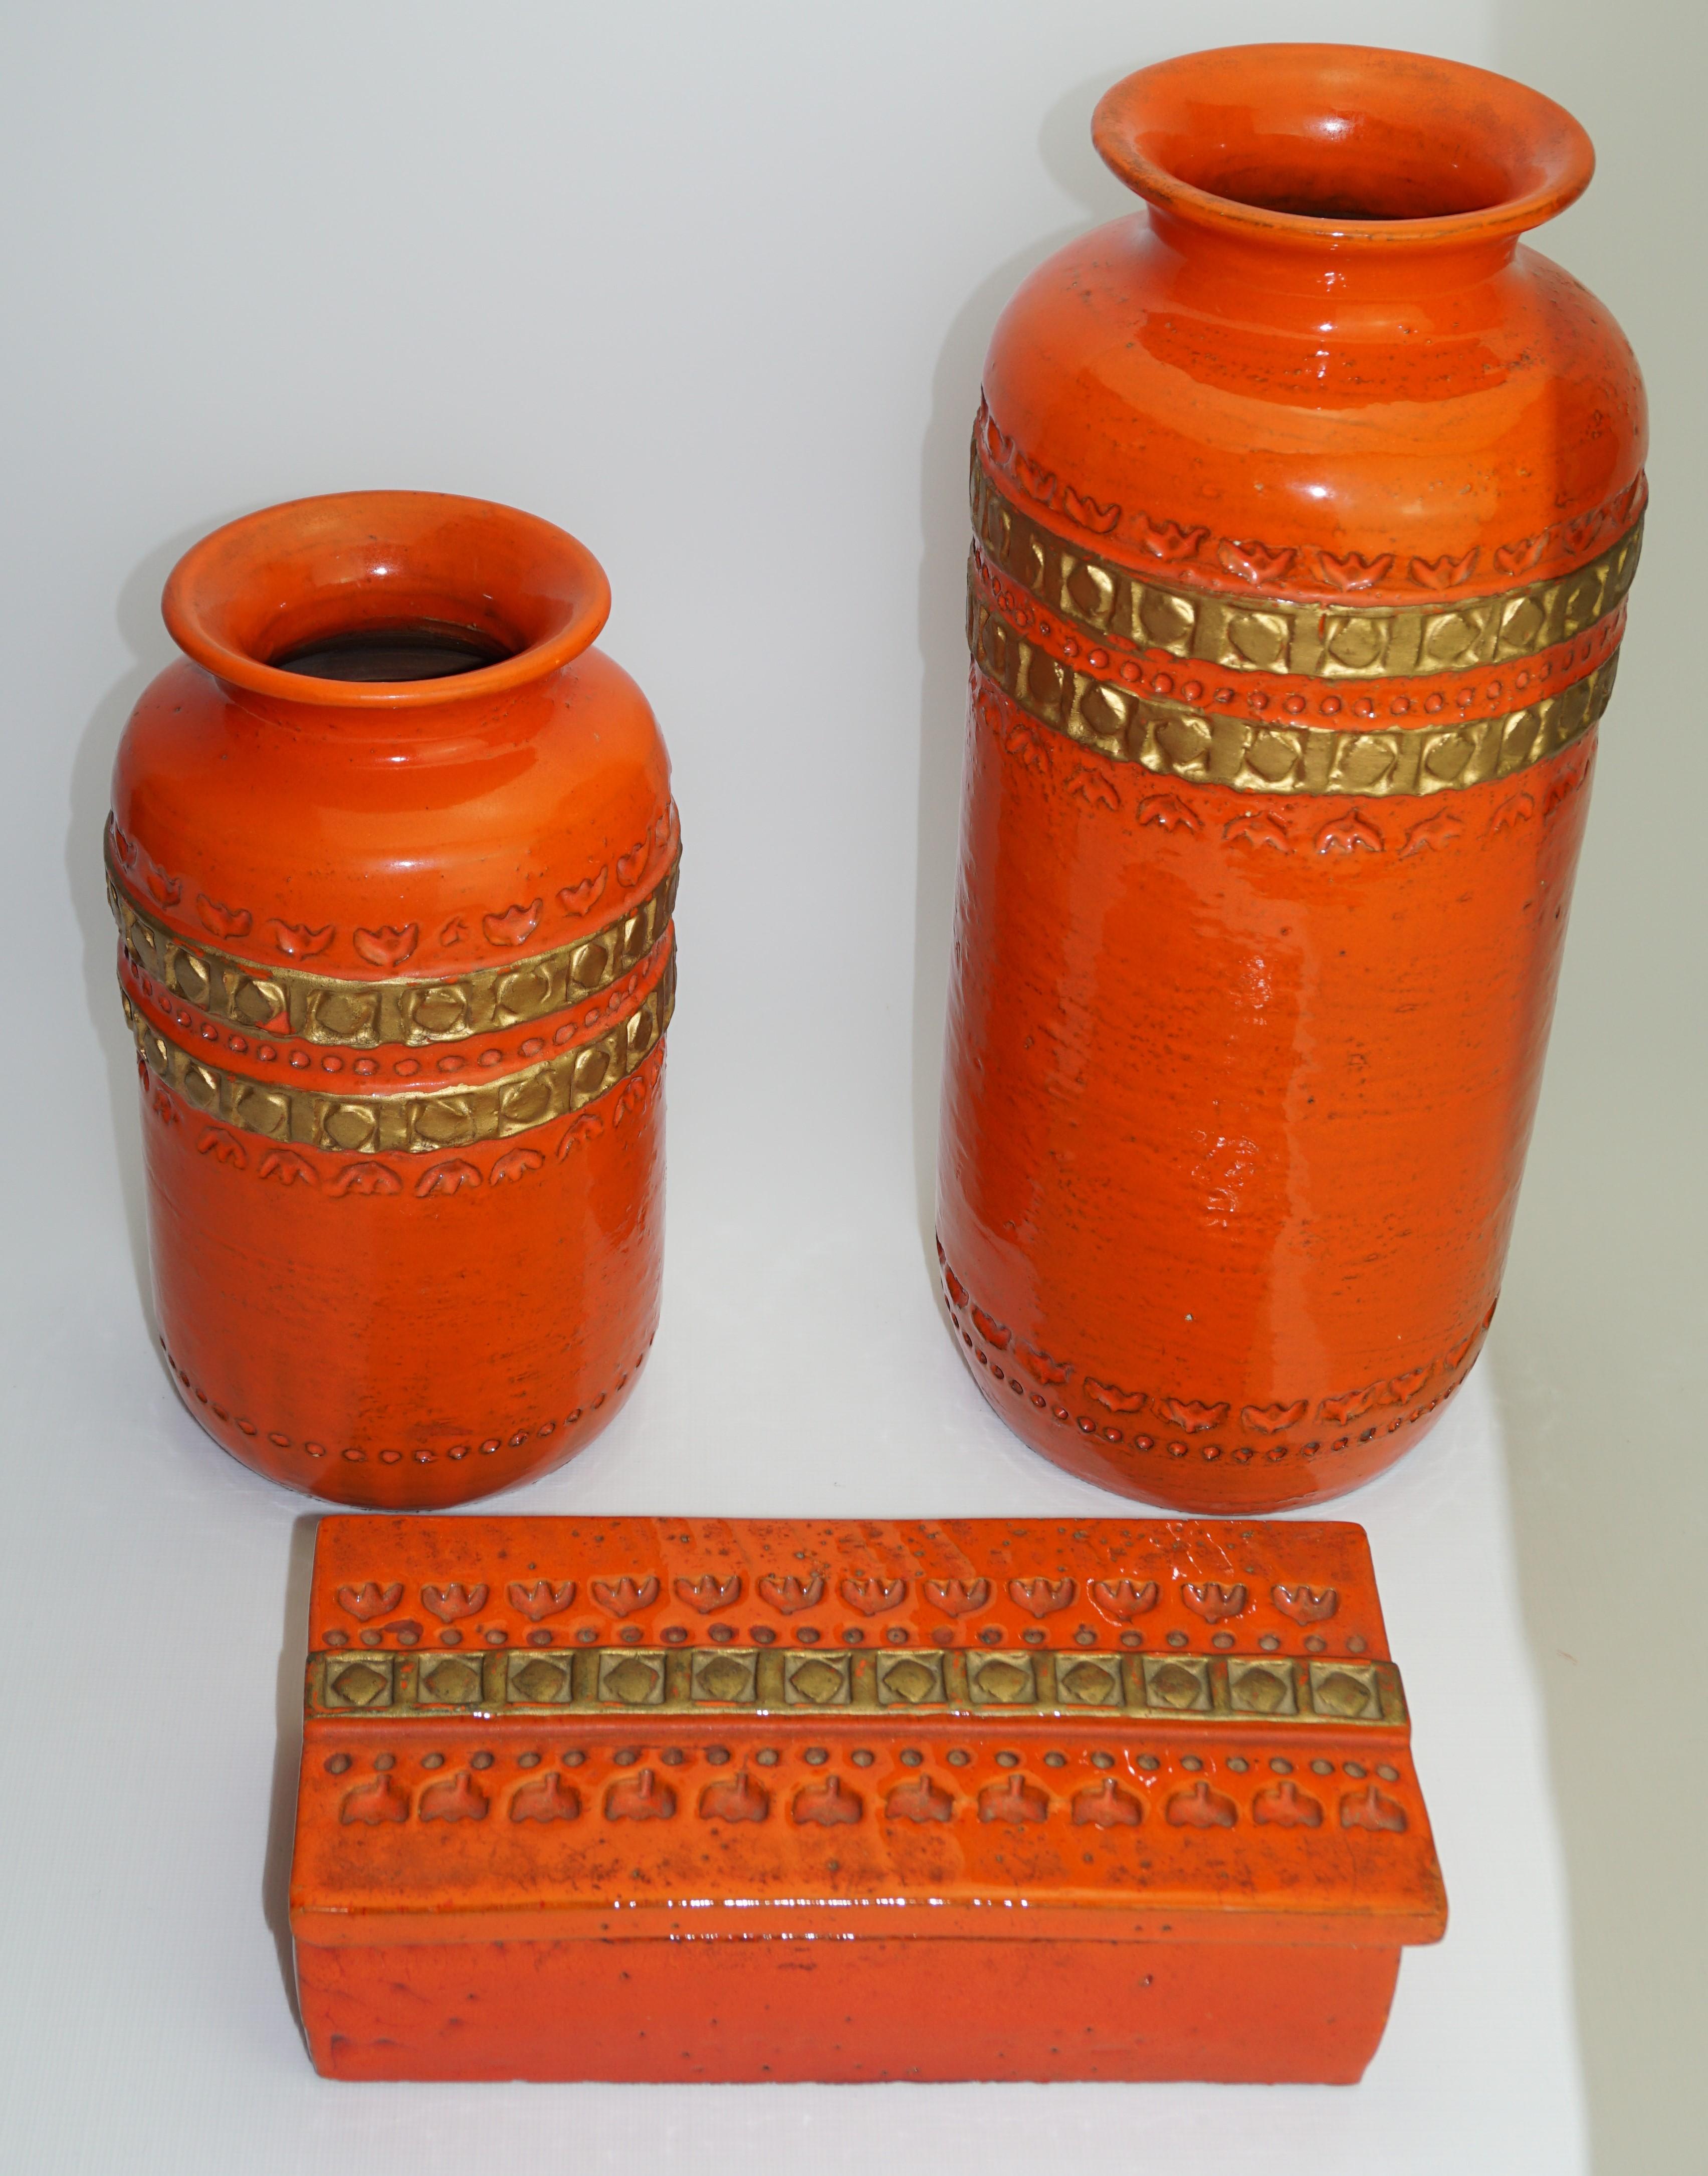 Hand-Crafted Ceramic Vase by Aldo Londi Bitossi, Orange with Gold Decoration, Italy, C 1960 For Sale